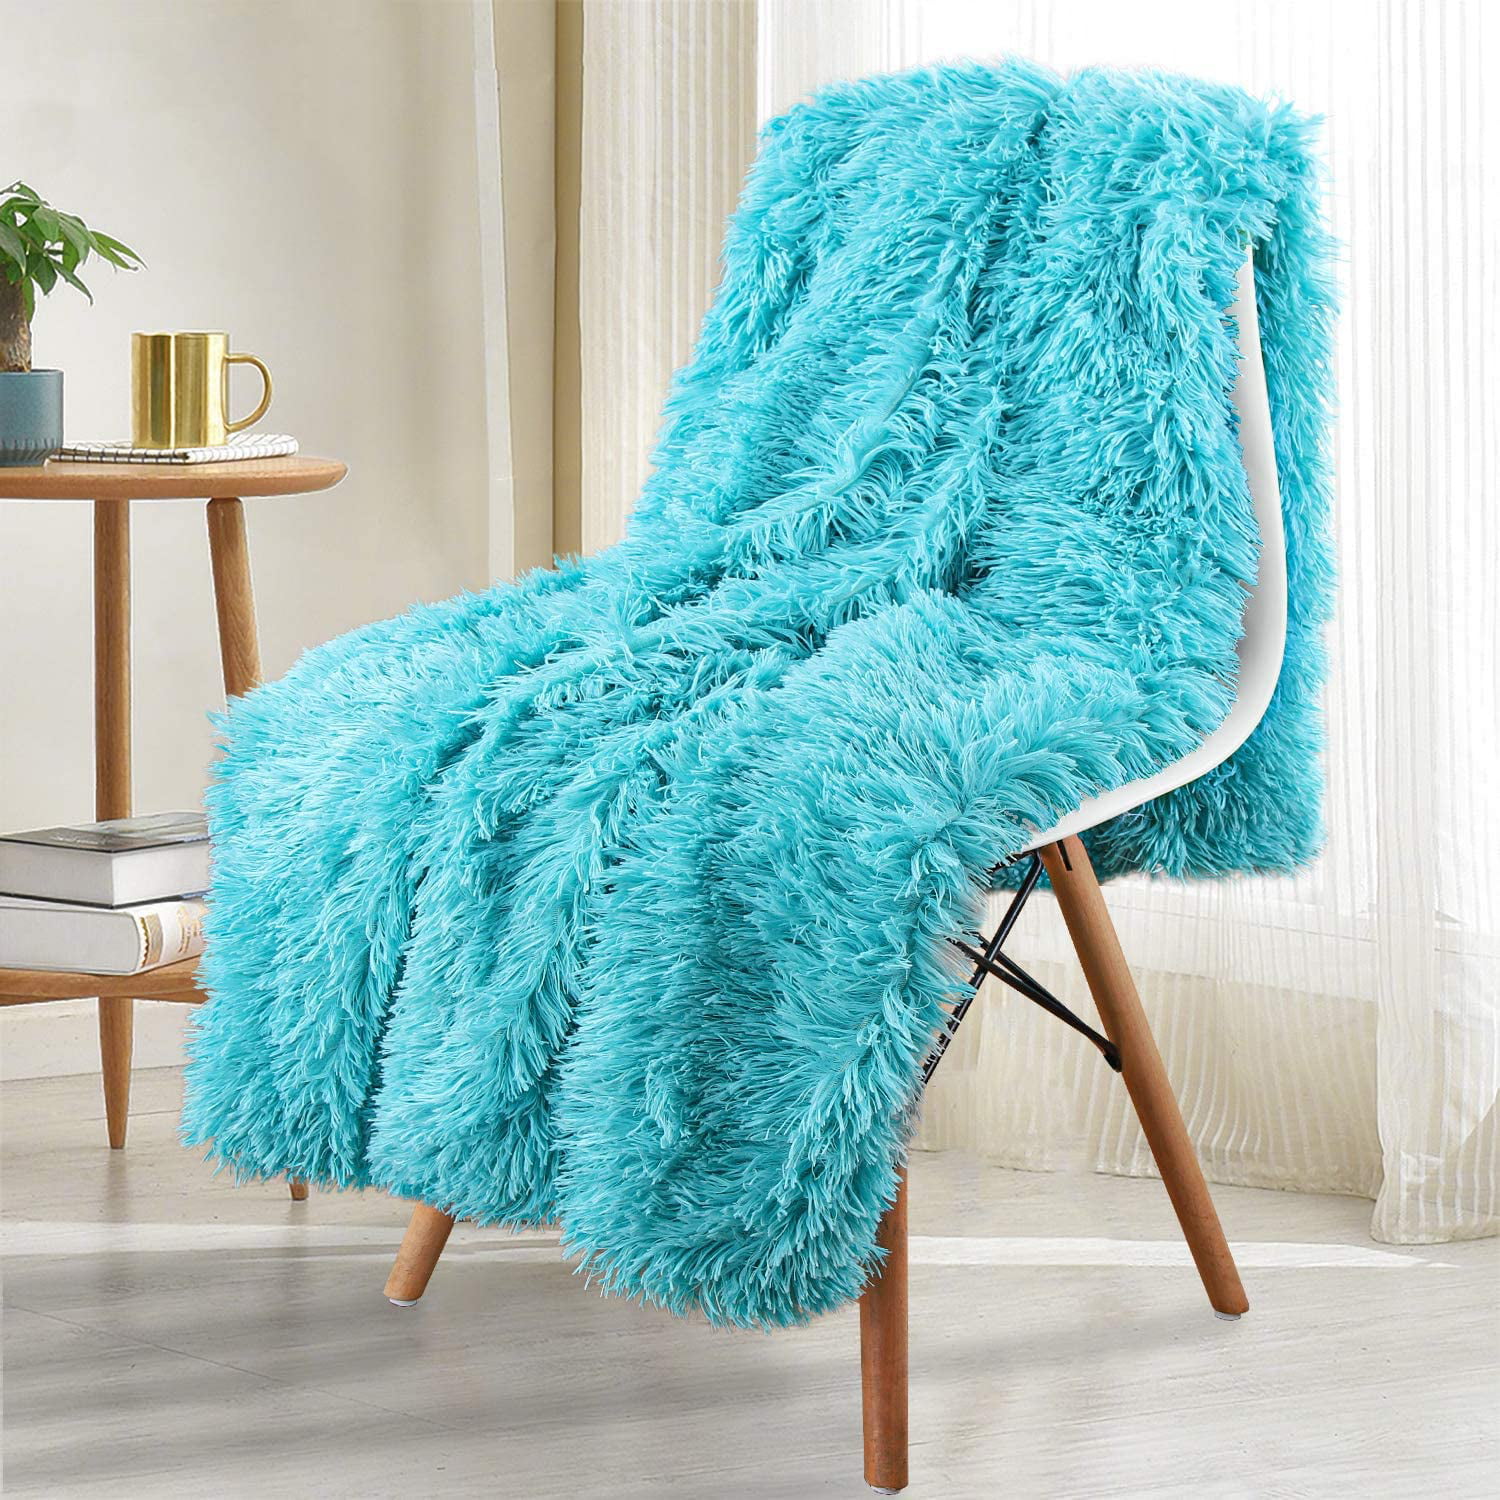 Teal Blue 60 x 80 Plush Fuzzy Bed Throw Decorative Washable Cozy Sherpa Fluffy Blankets for Couch Chair Sofa LOCHAS Super Soft Shaggy Faux Fur Blanket 